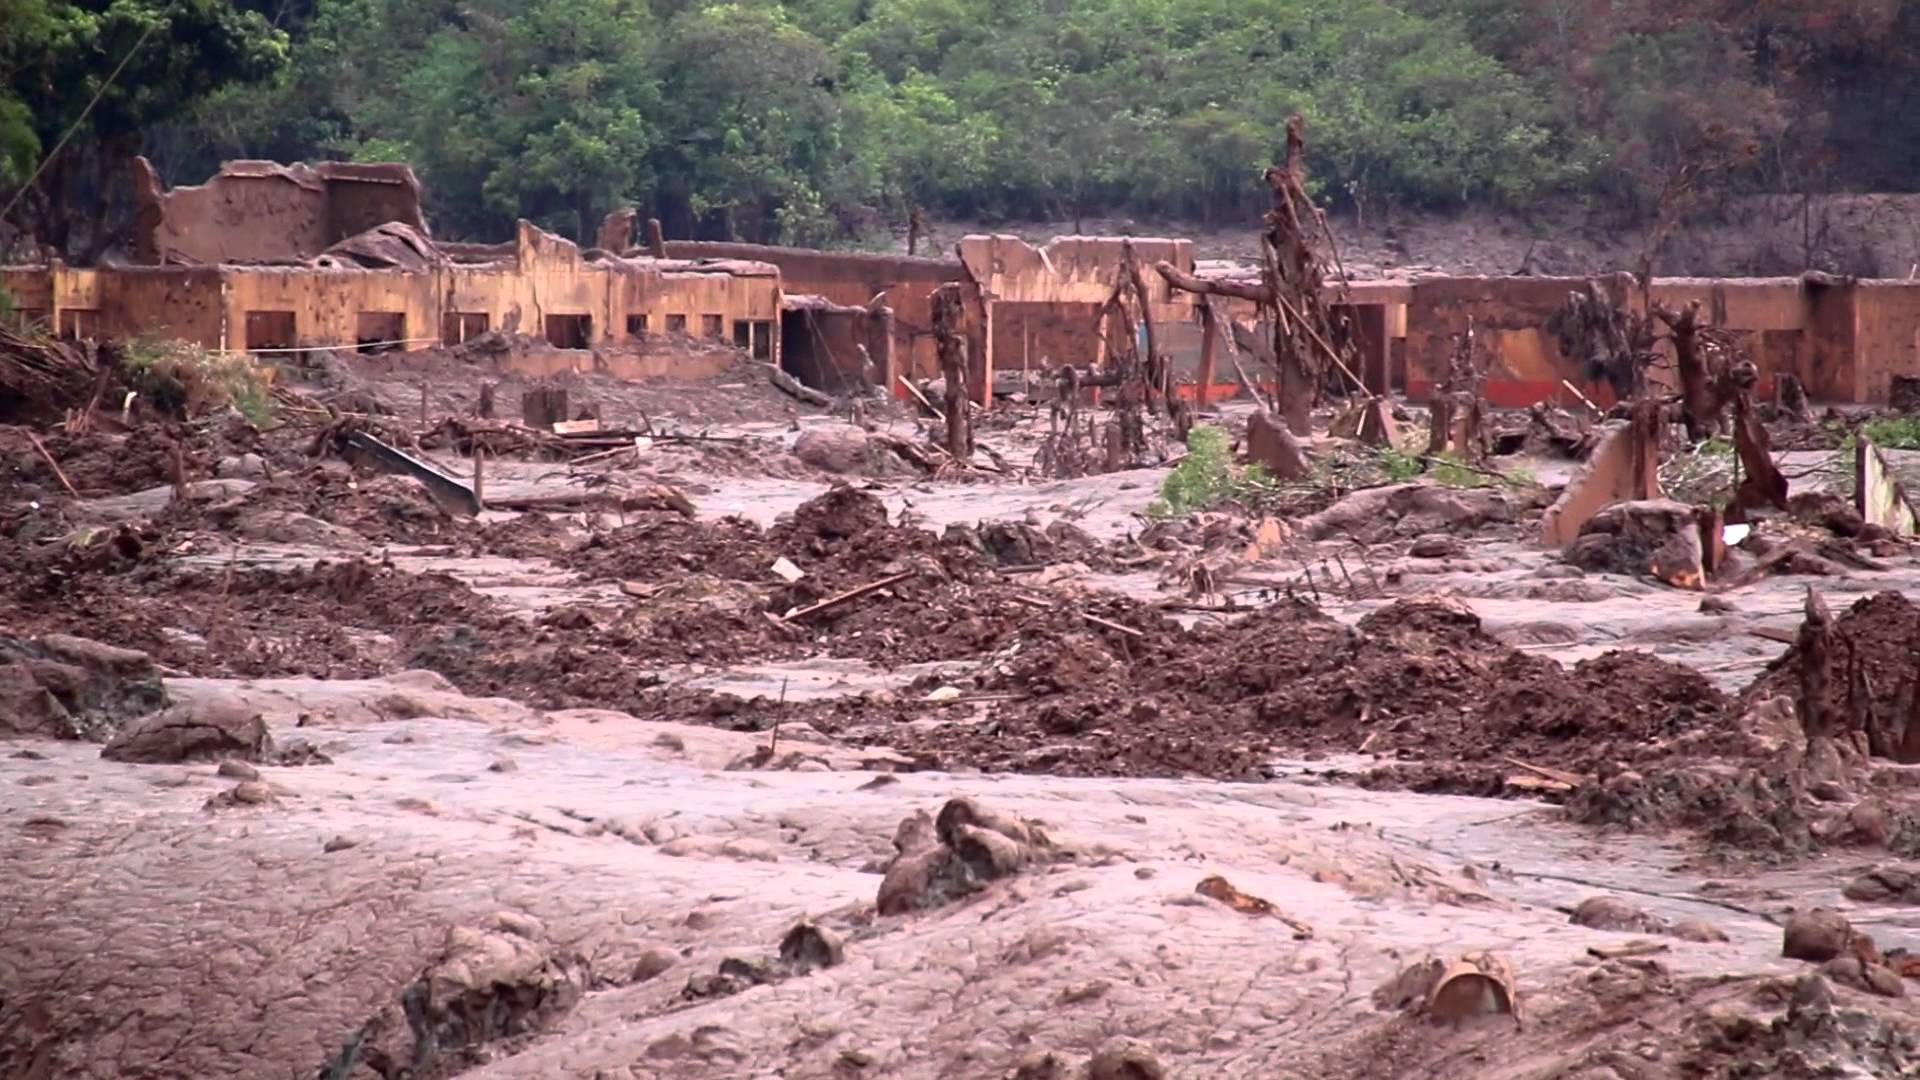 Dam collapse in Brazil destroys towns and turns river into muddy wasteland|Destruction Caused by Toxic Mud Disaster in BrazilDesastre ambiental em Mariana-MG|Mariana’s Toxic Mud Disaster in BrazilDesastre ambiental em Mariana-MG